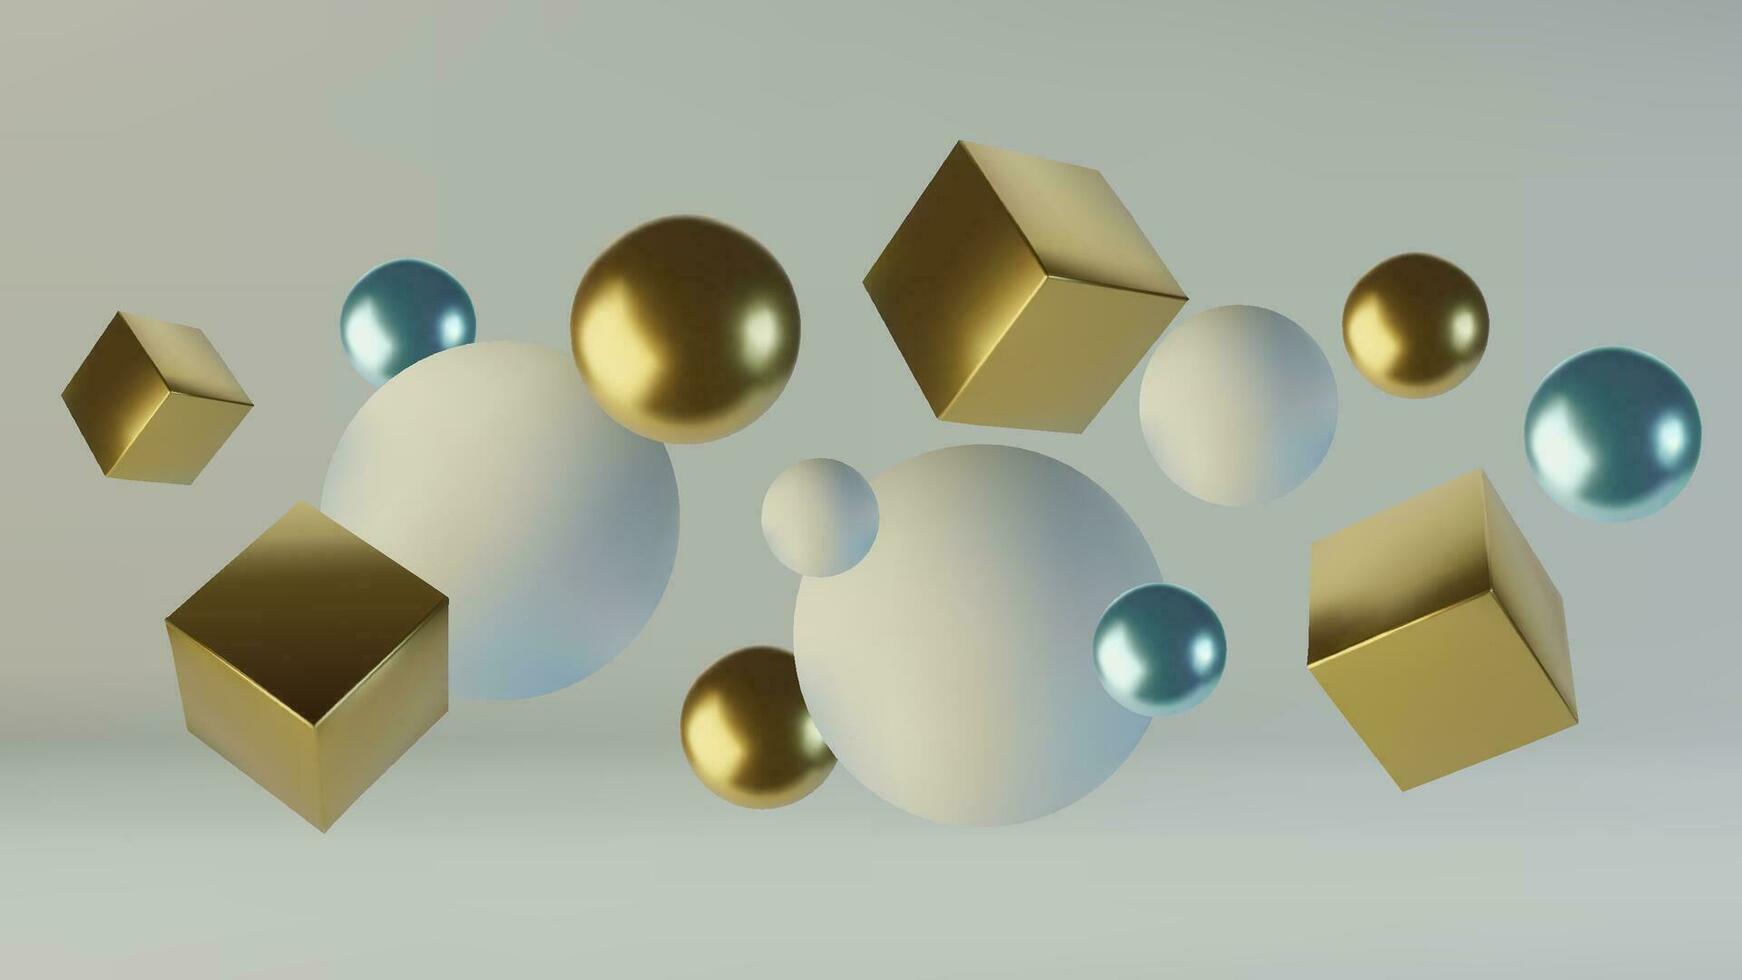 Realistic spheres and cubes. Abstract background of primitive geometric figures. Design element of 3d golden and blue ball and box. Vector illustration